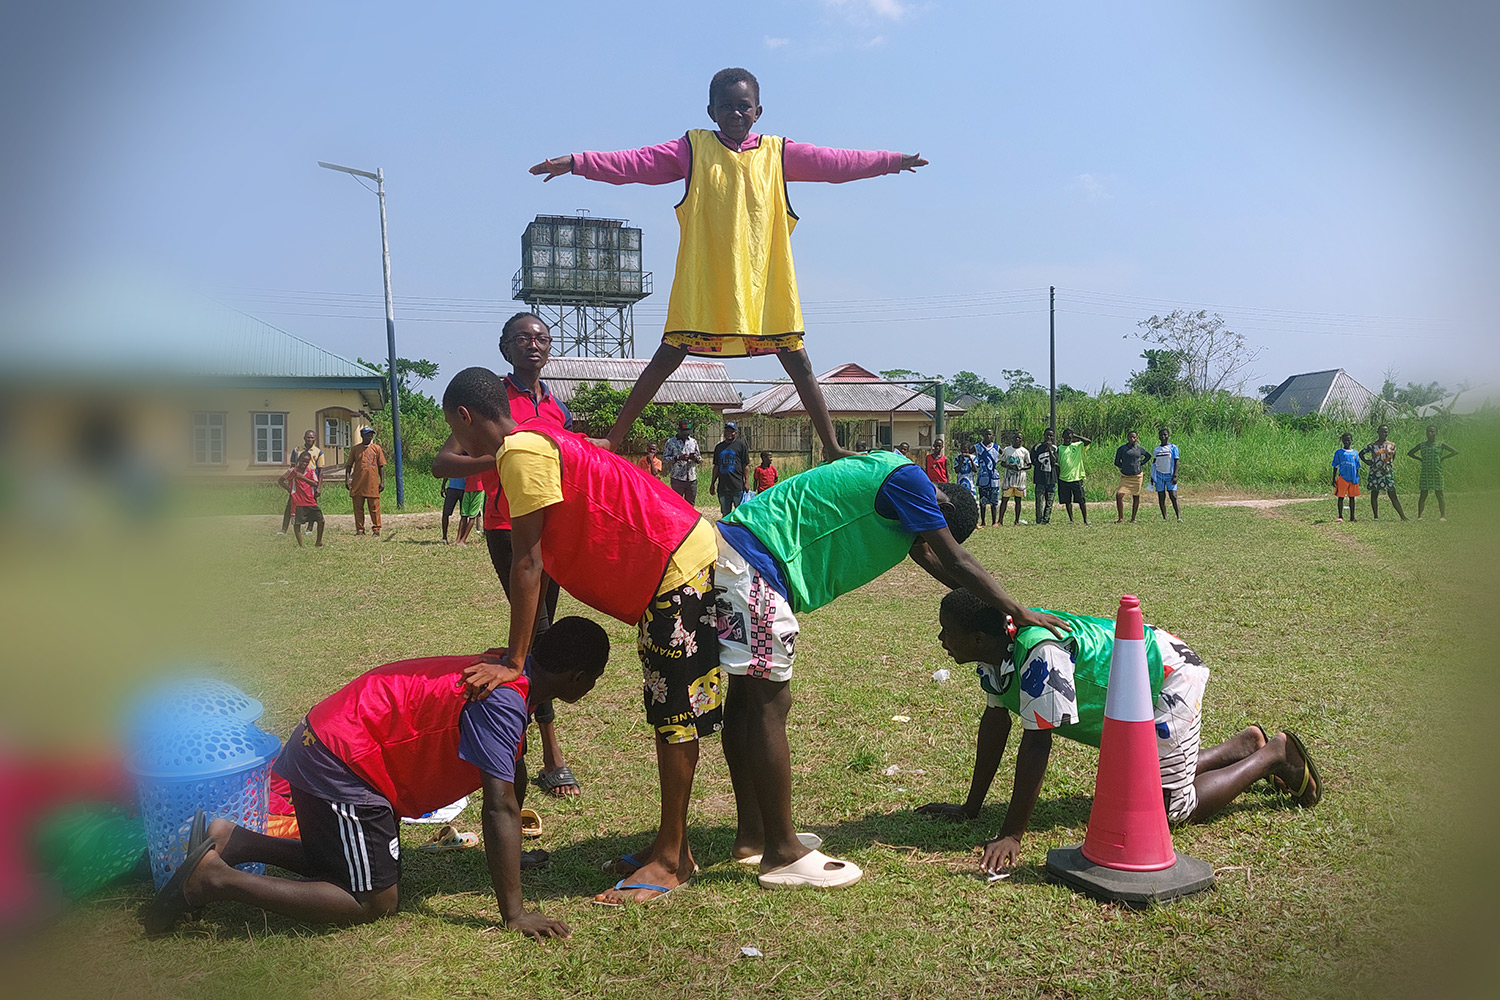 Youth making a human pyramid in a grassy field in Nigeria. 